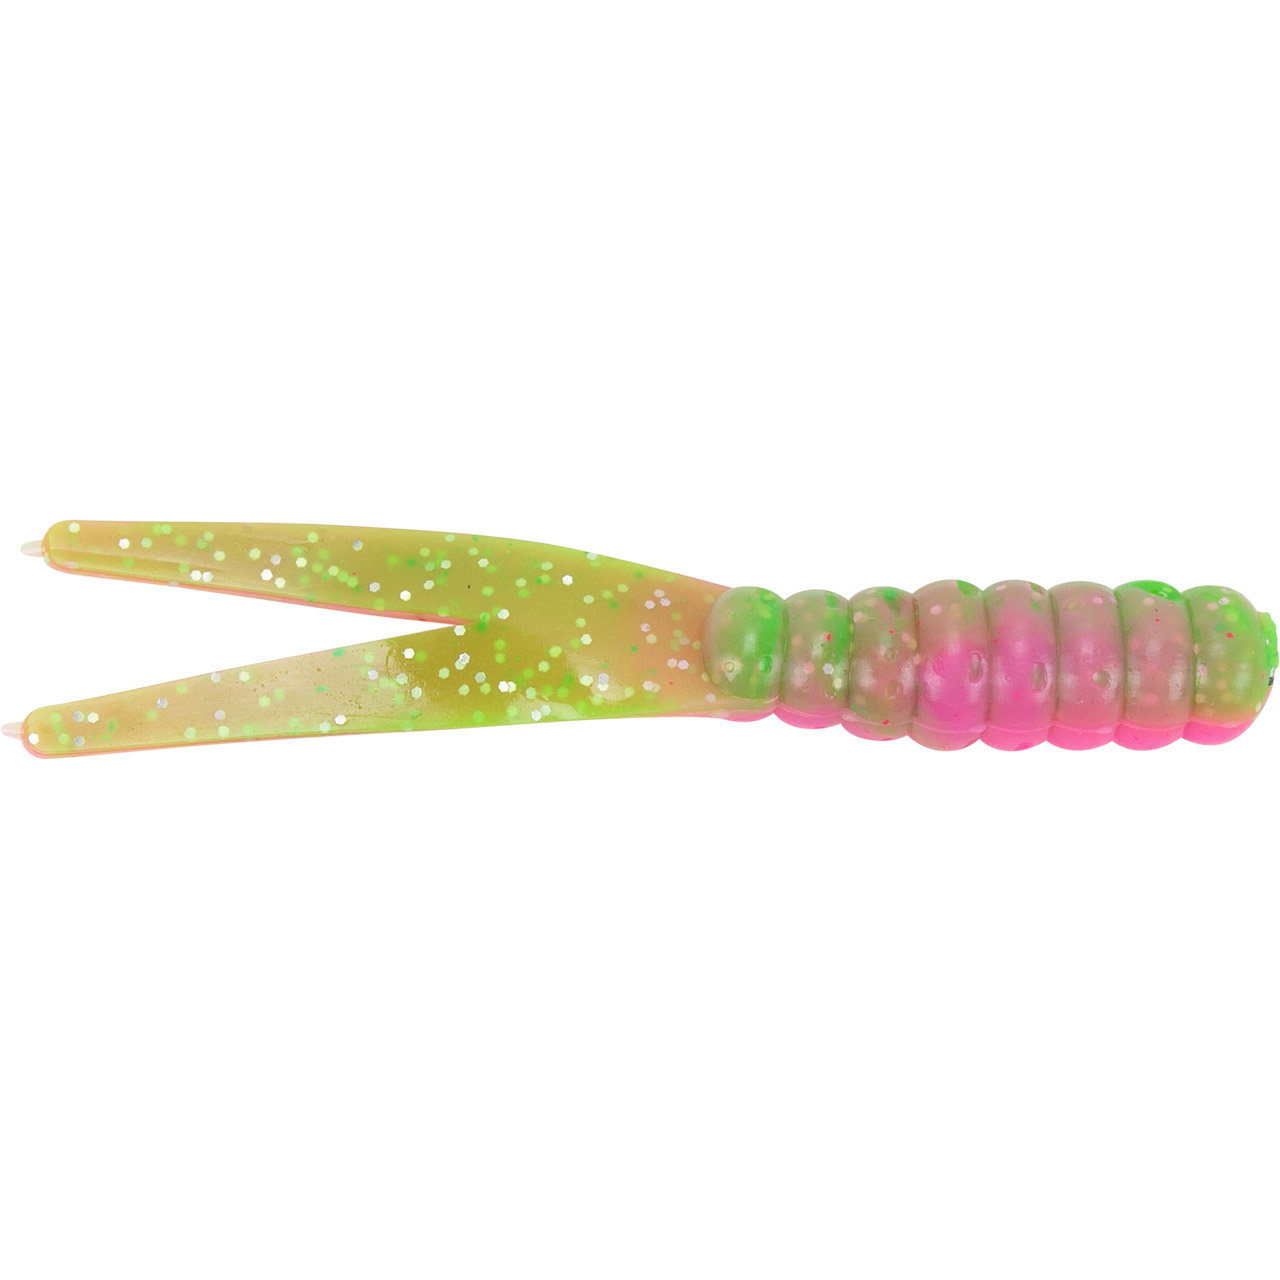 Soft Fishing Lures Fishing Lures Soft Soft Plastic Lure Soft Frog